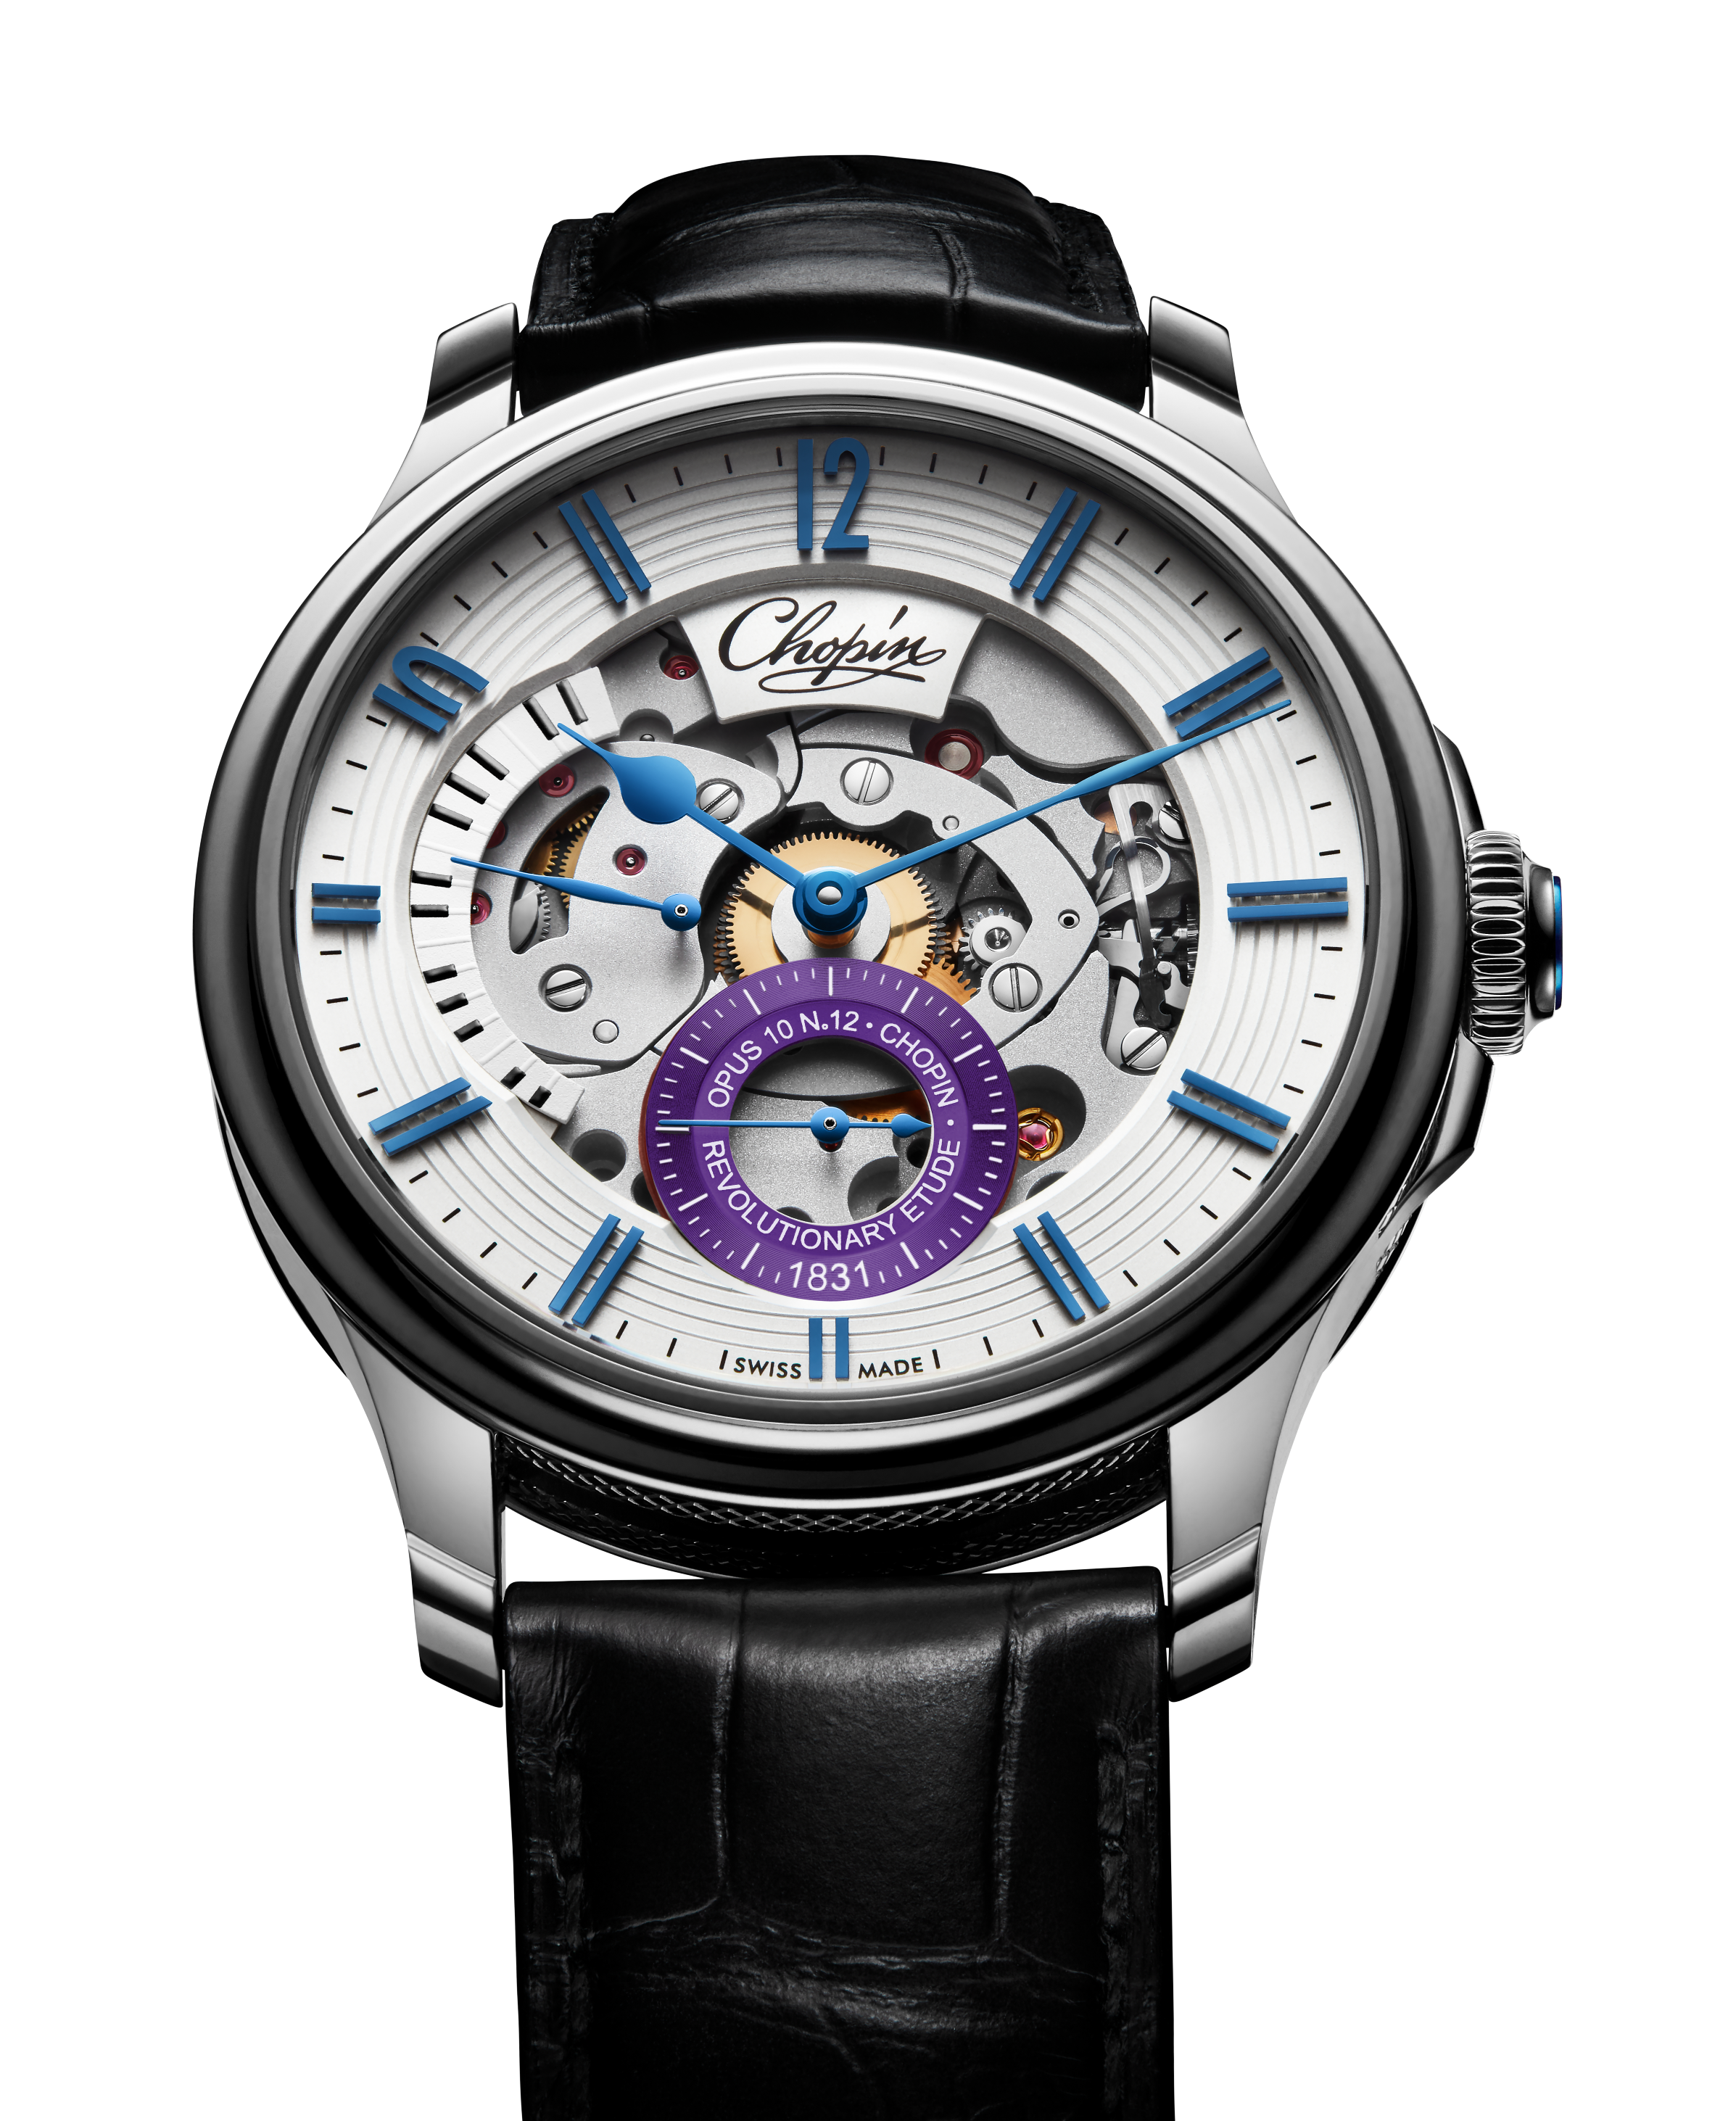 Chopin Opus 10 No. 12 “Violet Edition” Watch Review